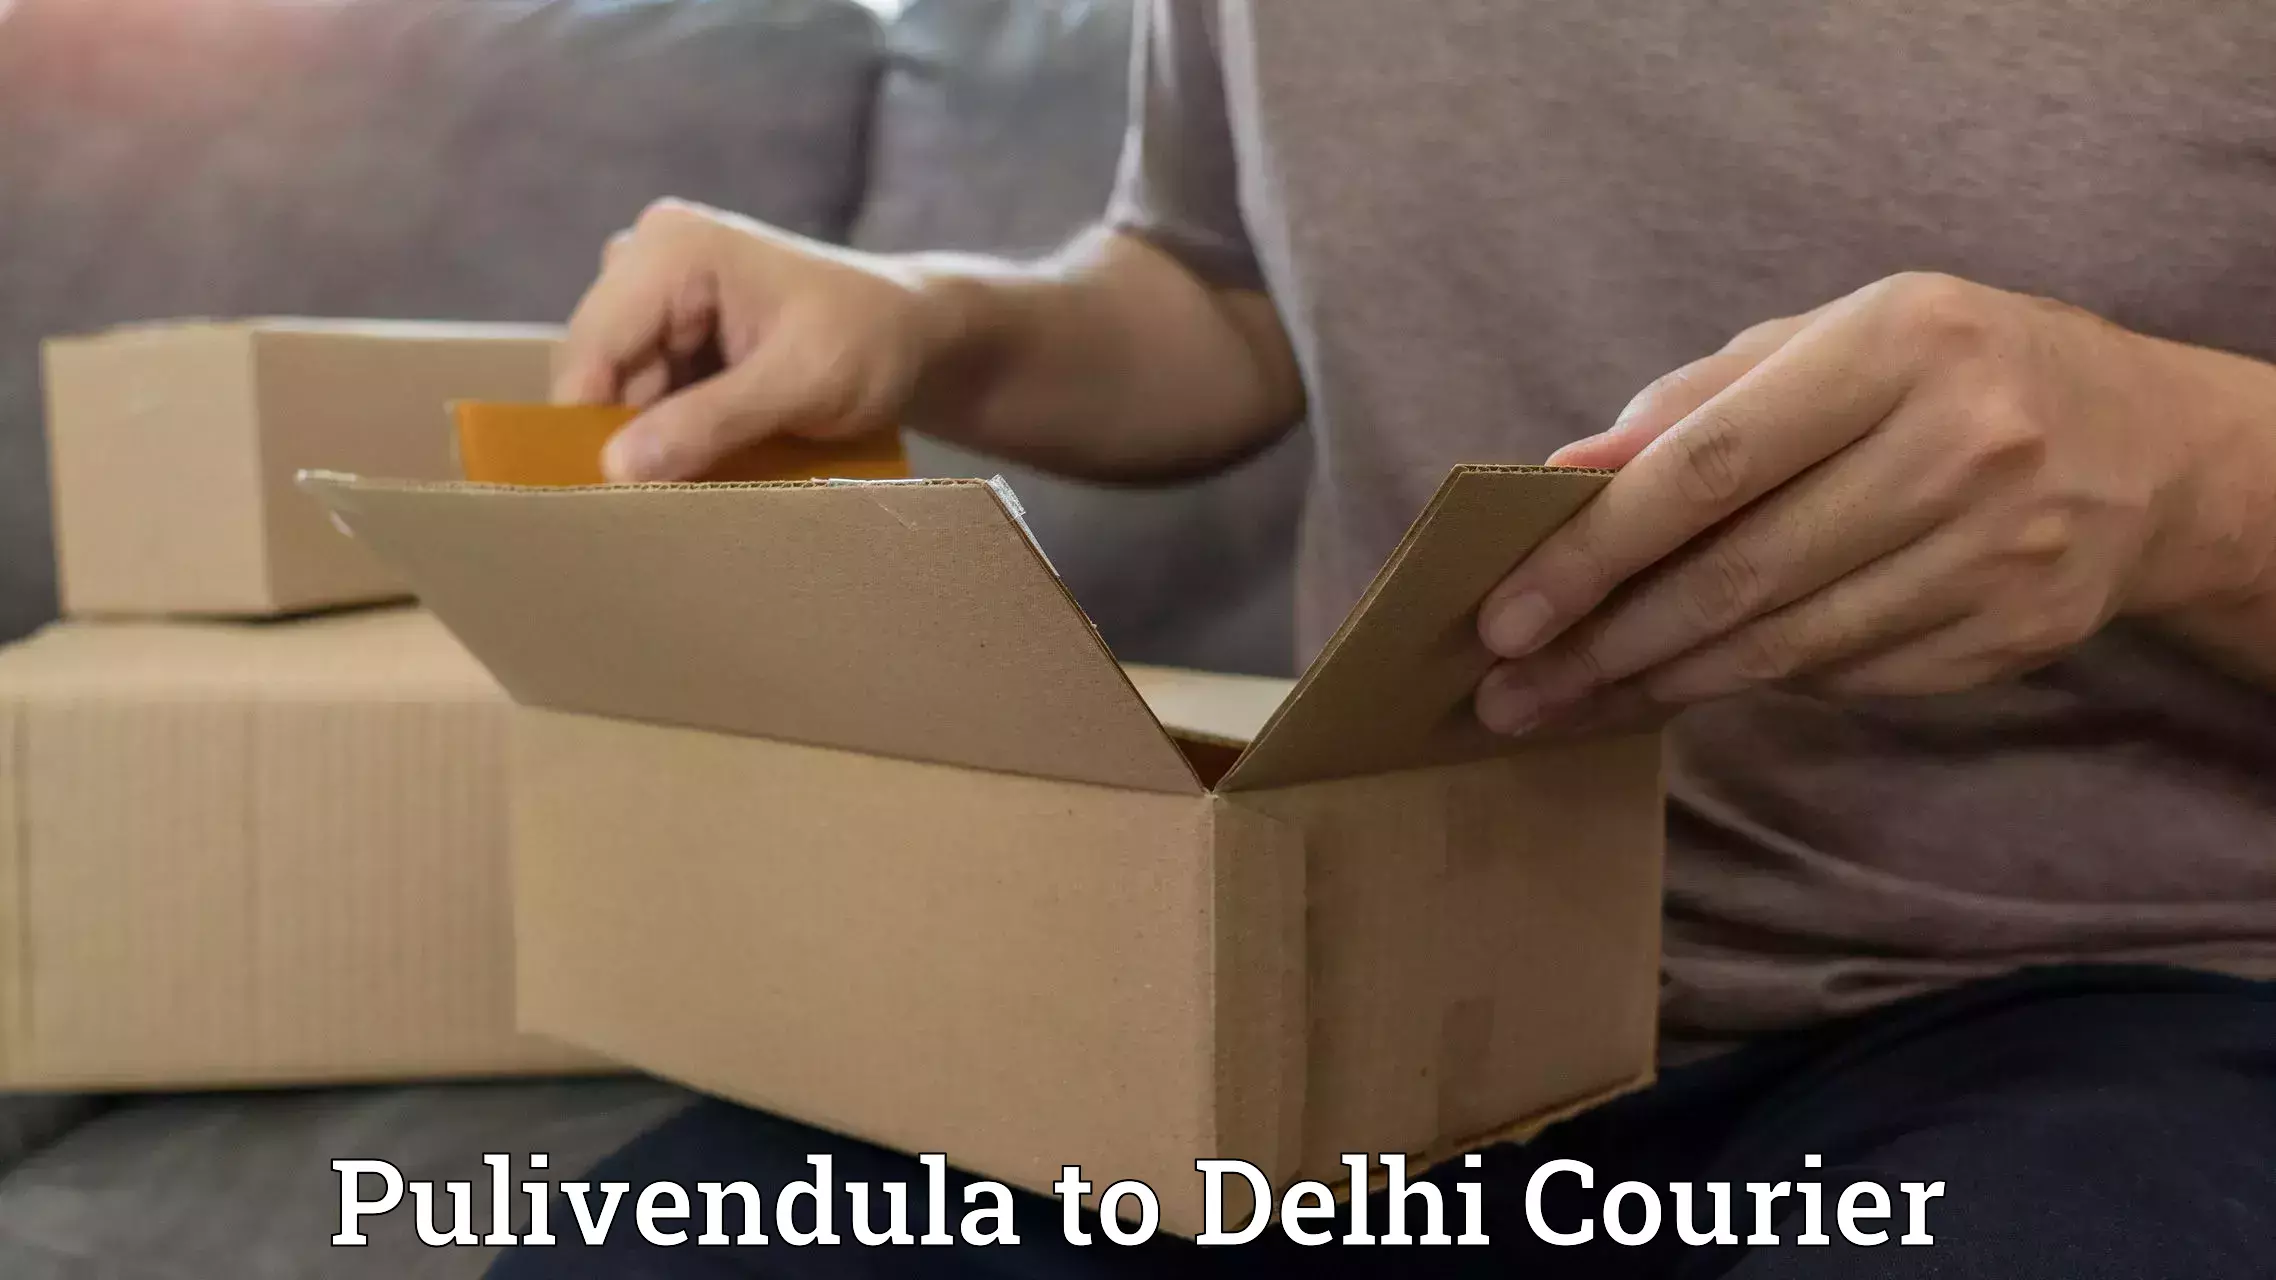 Reliable delivery network Pulivendula to Krishna Nagar